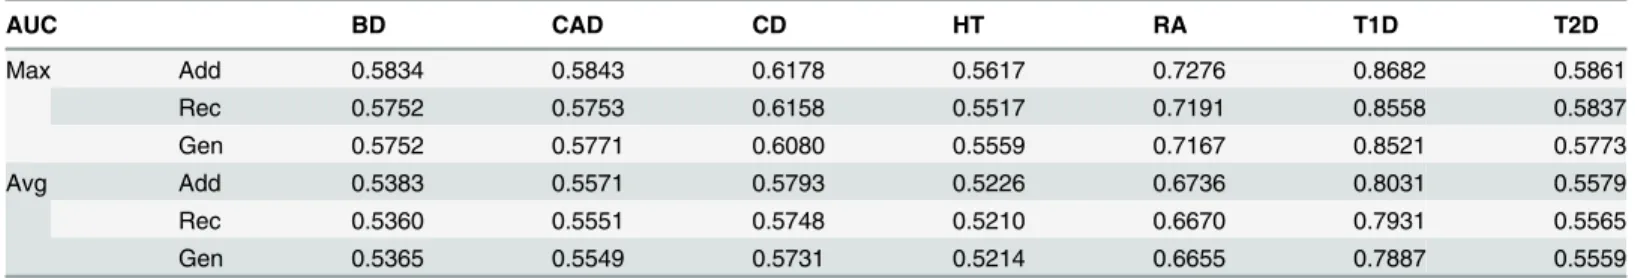 Table 7. Maximum and average AUCs for different encodings grouped by data set.